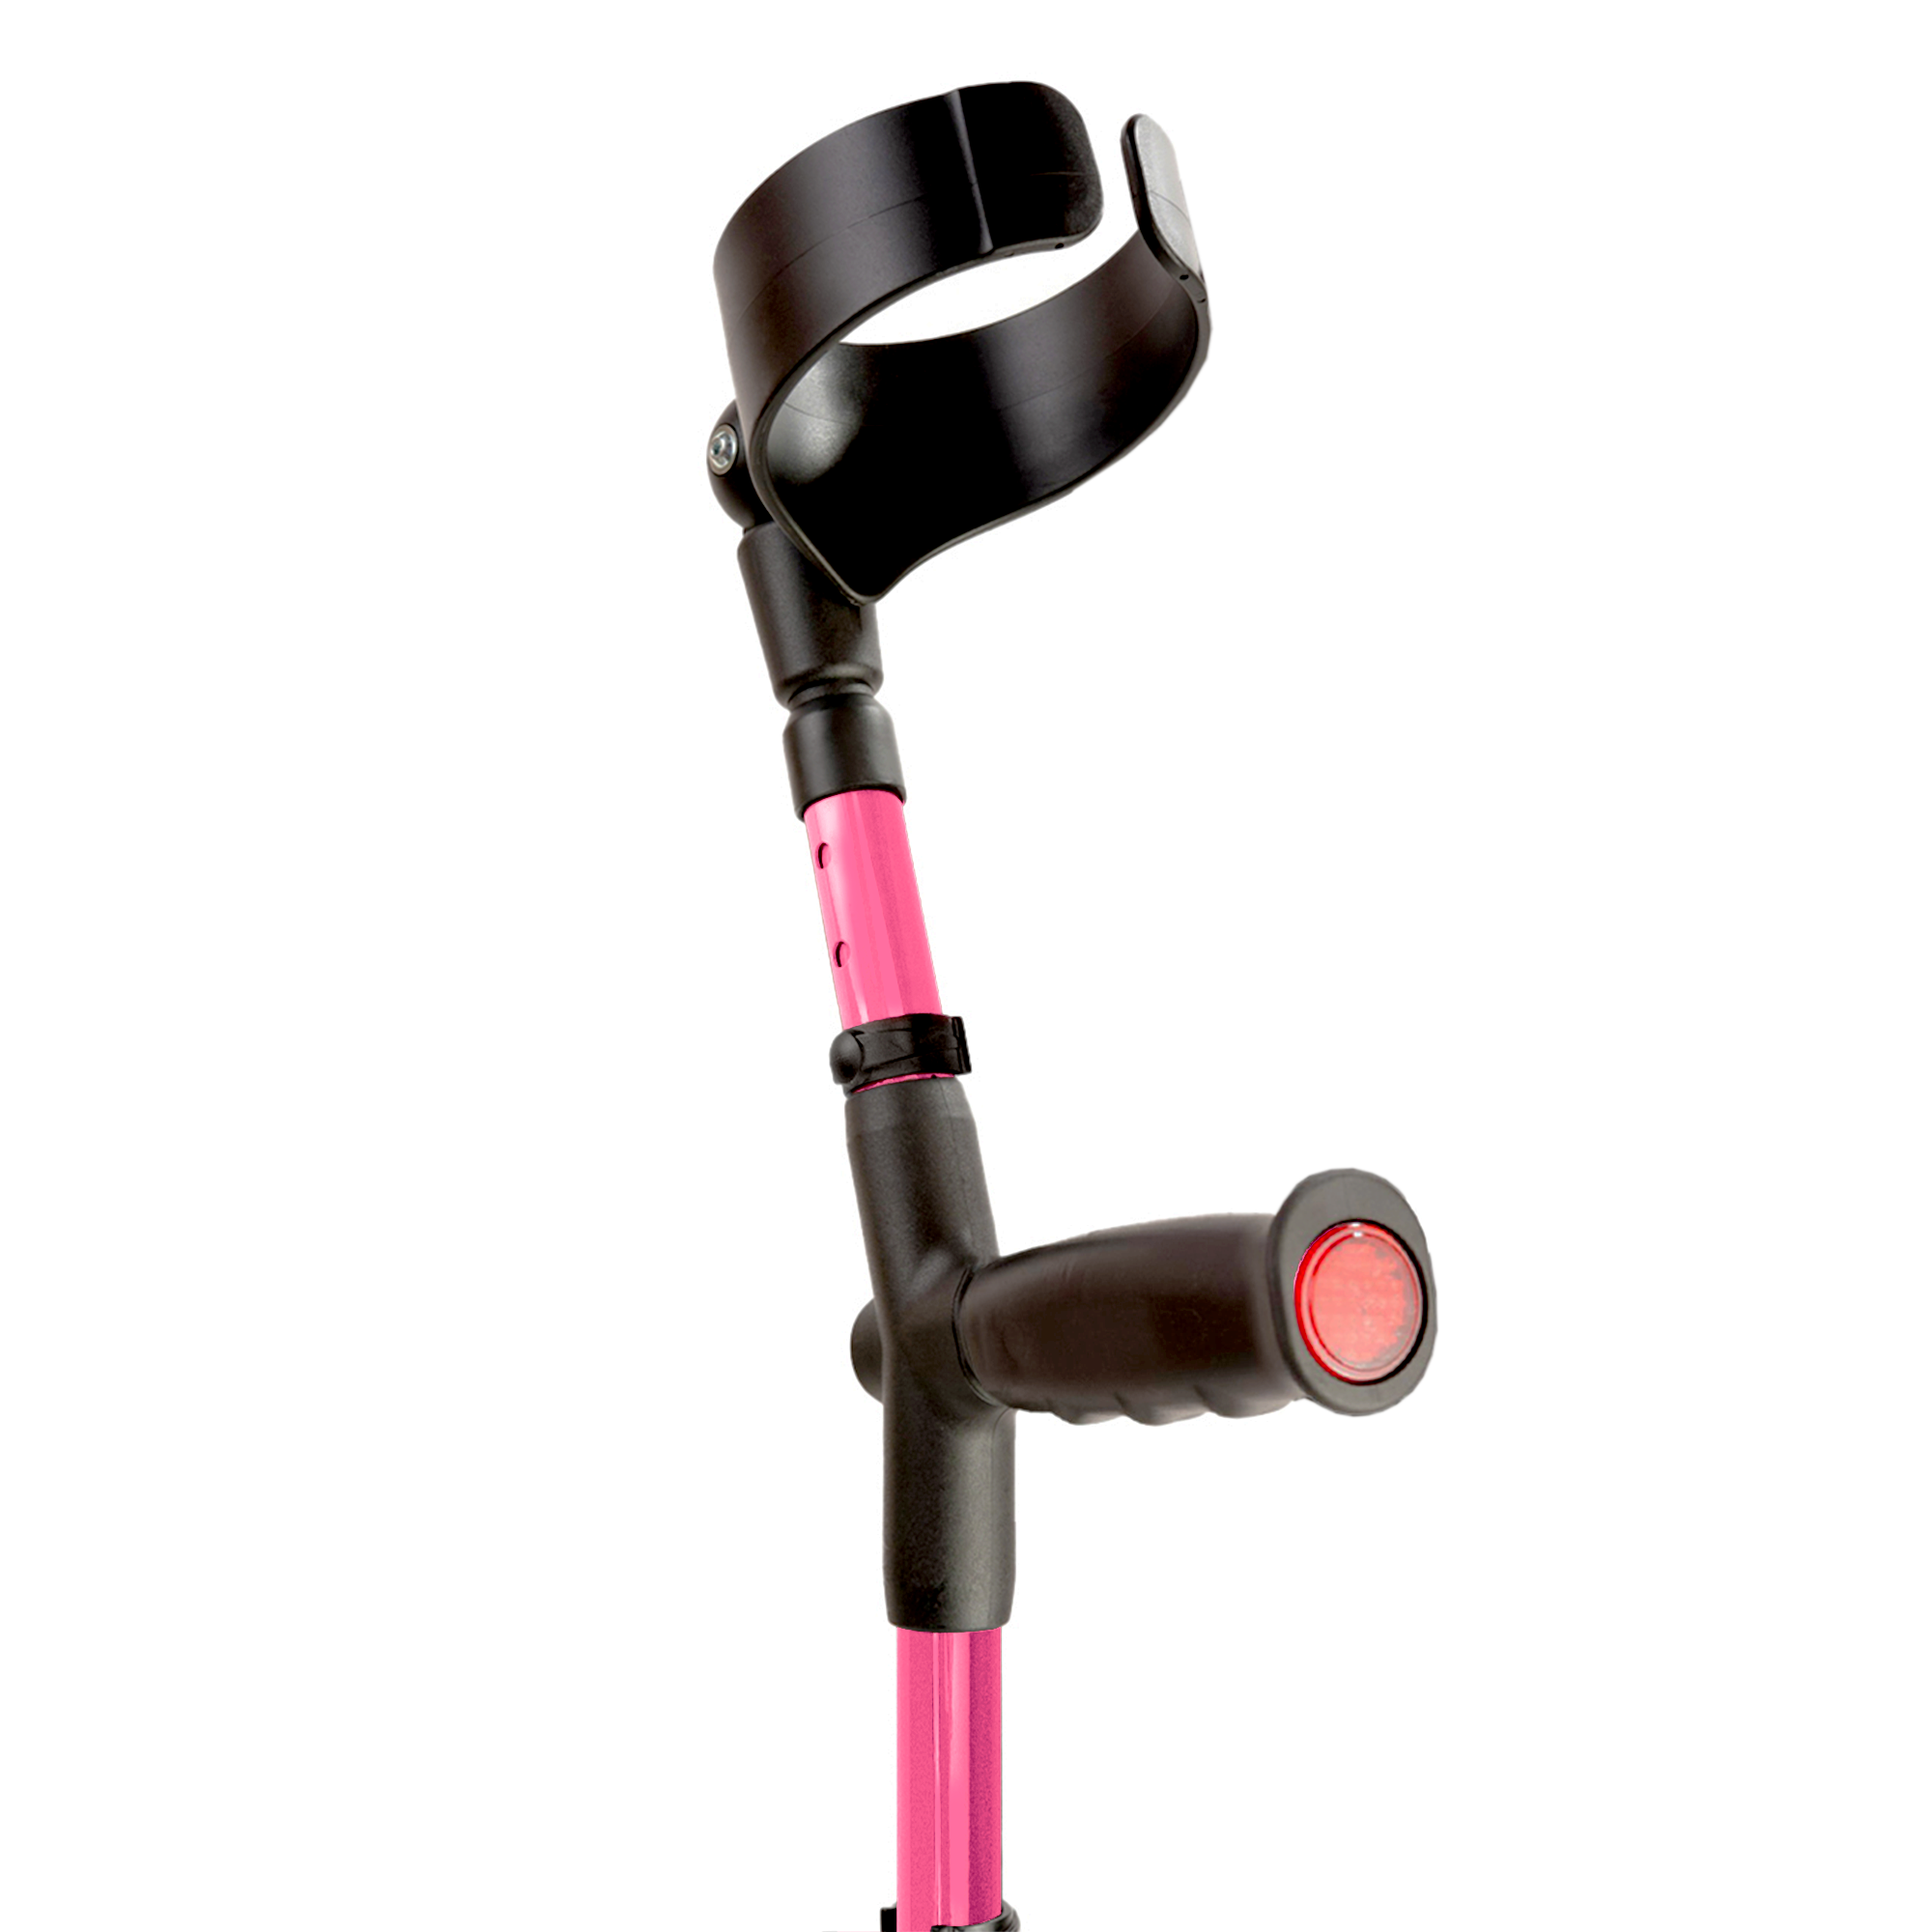 Soft grip handle and closed cuff of the Flexyfoot Soft Grip Double Adjustable Crutch